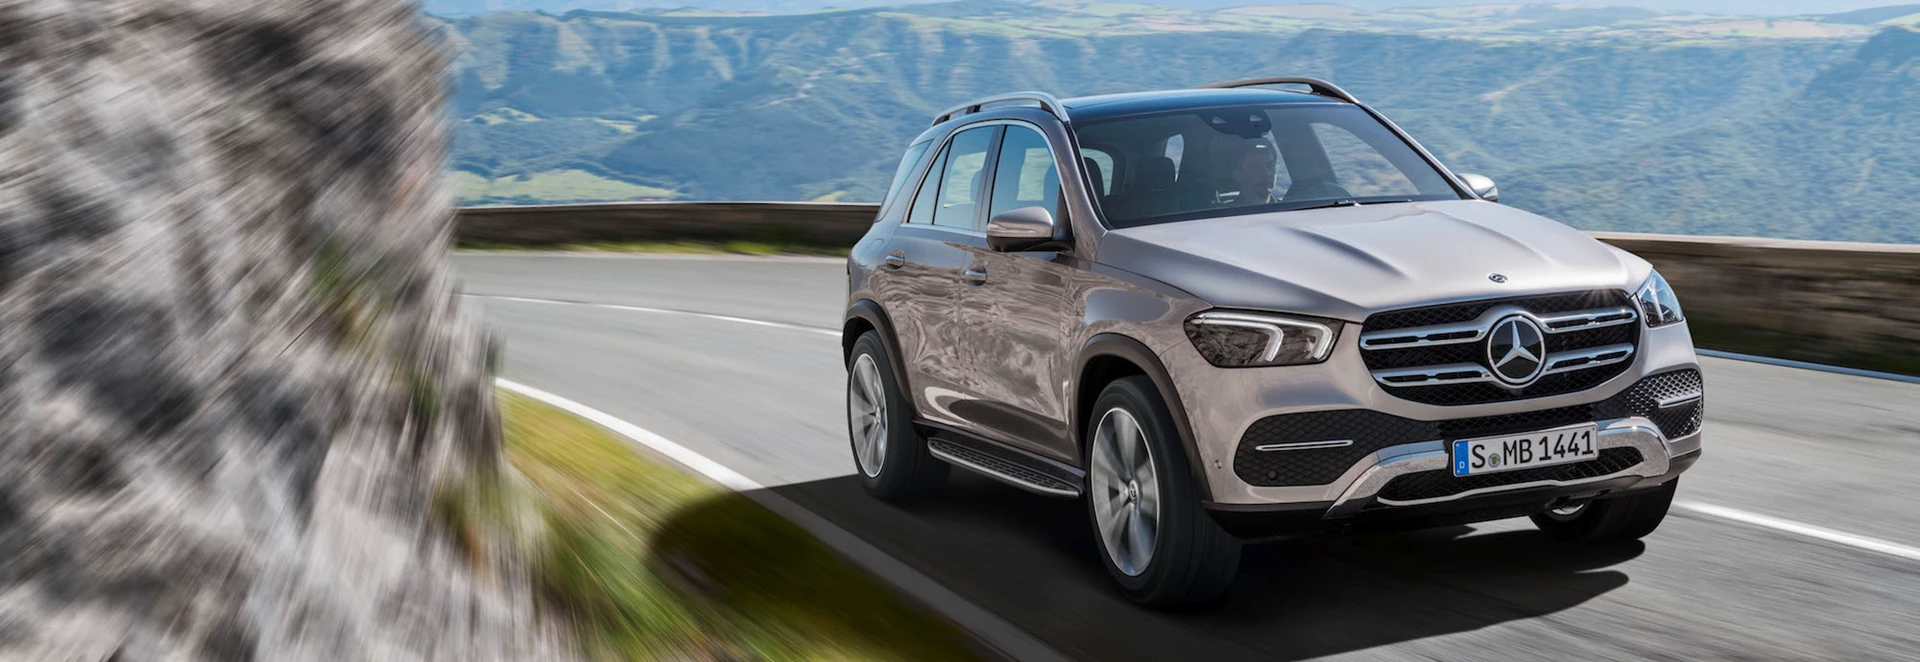 2019 Mercedes-Benz GLE unveiled 